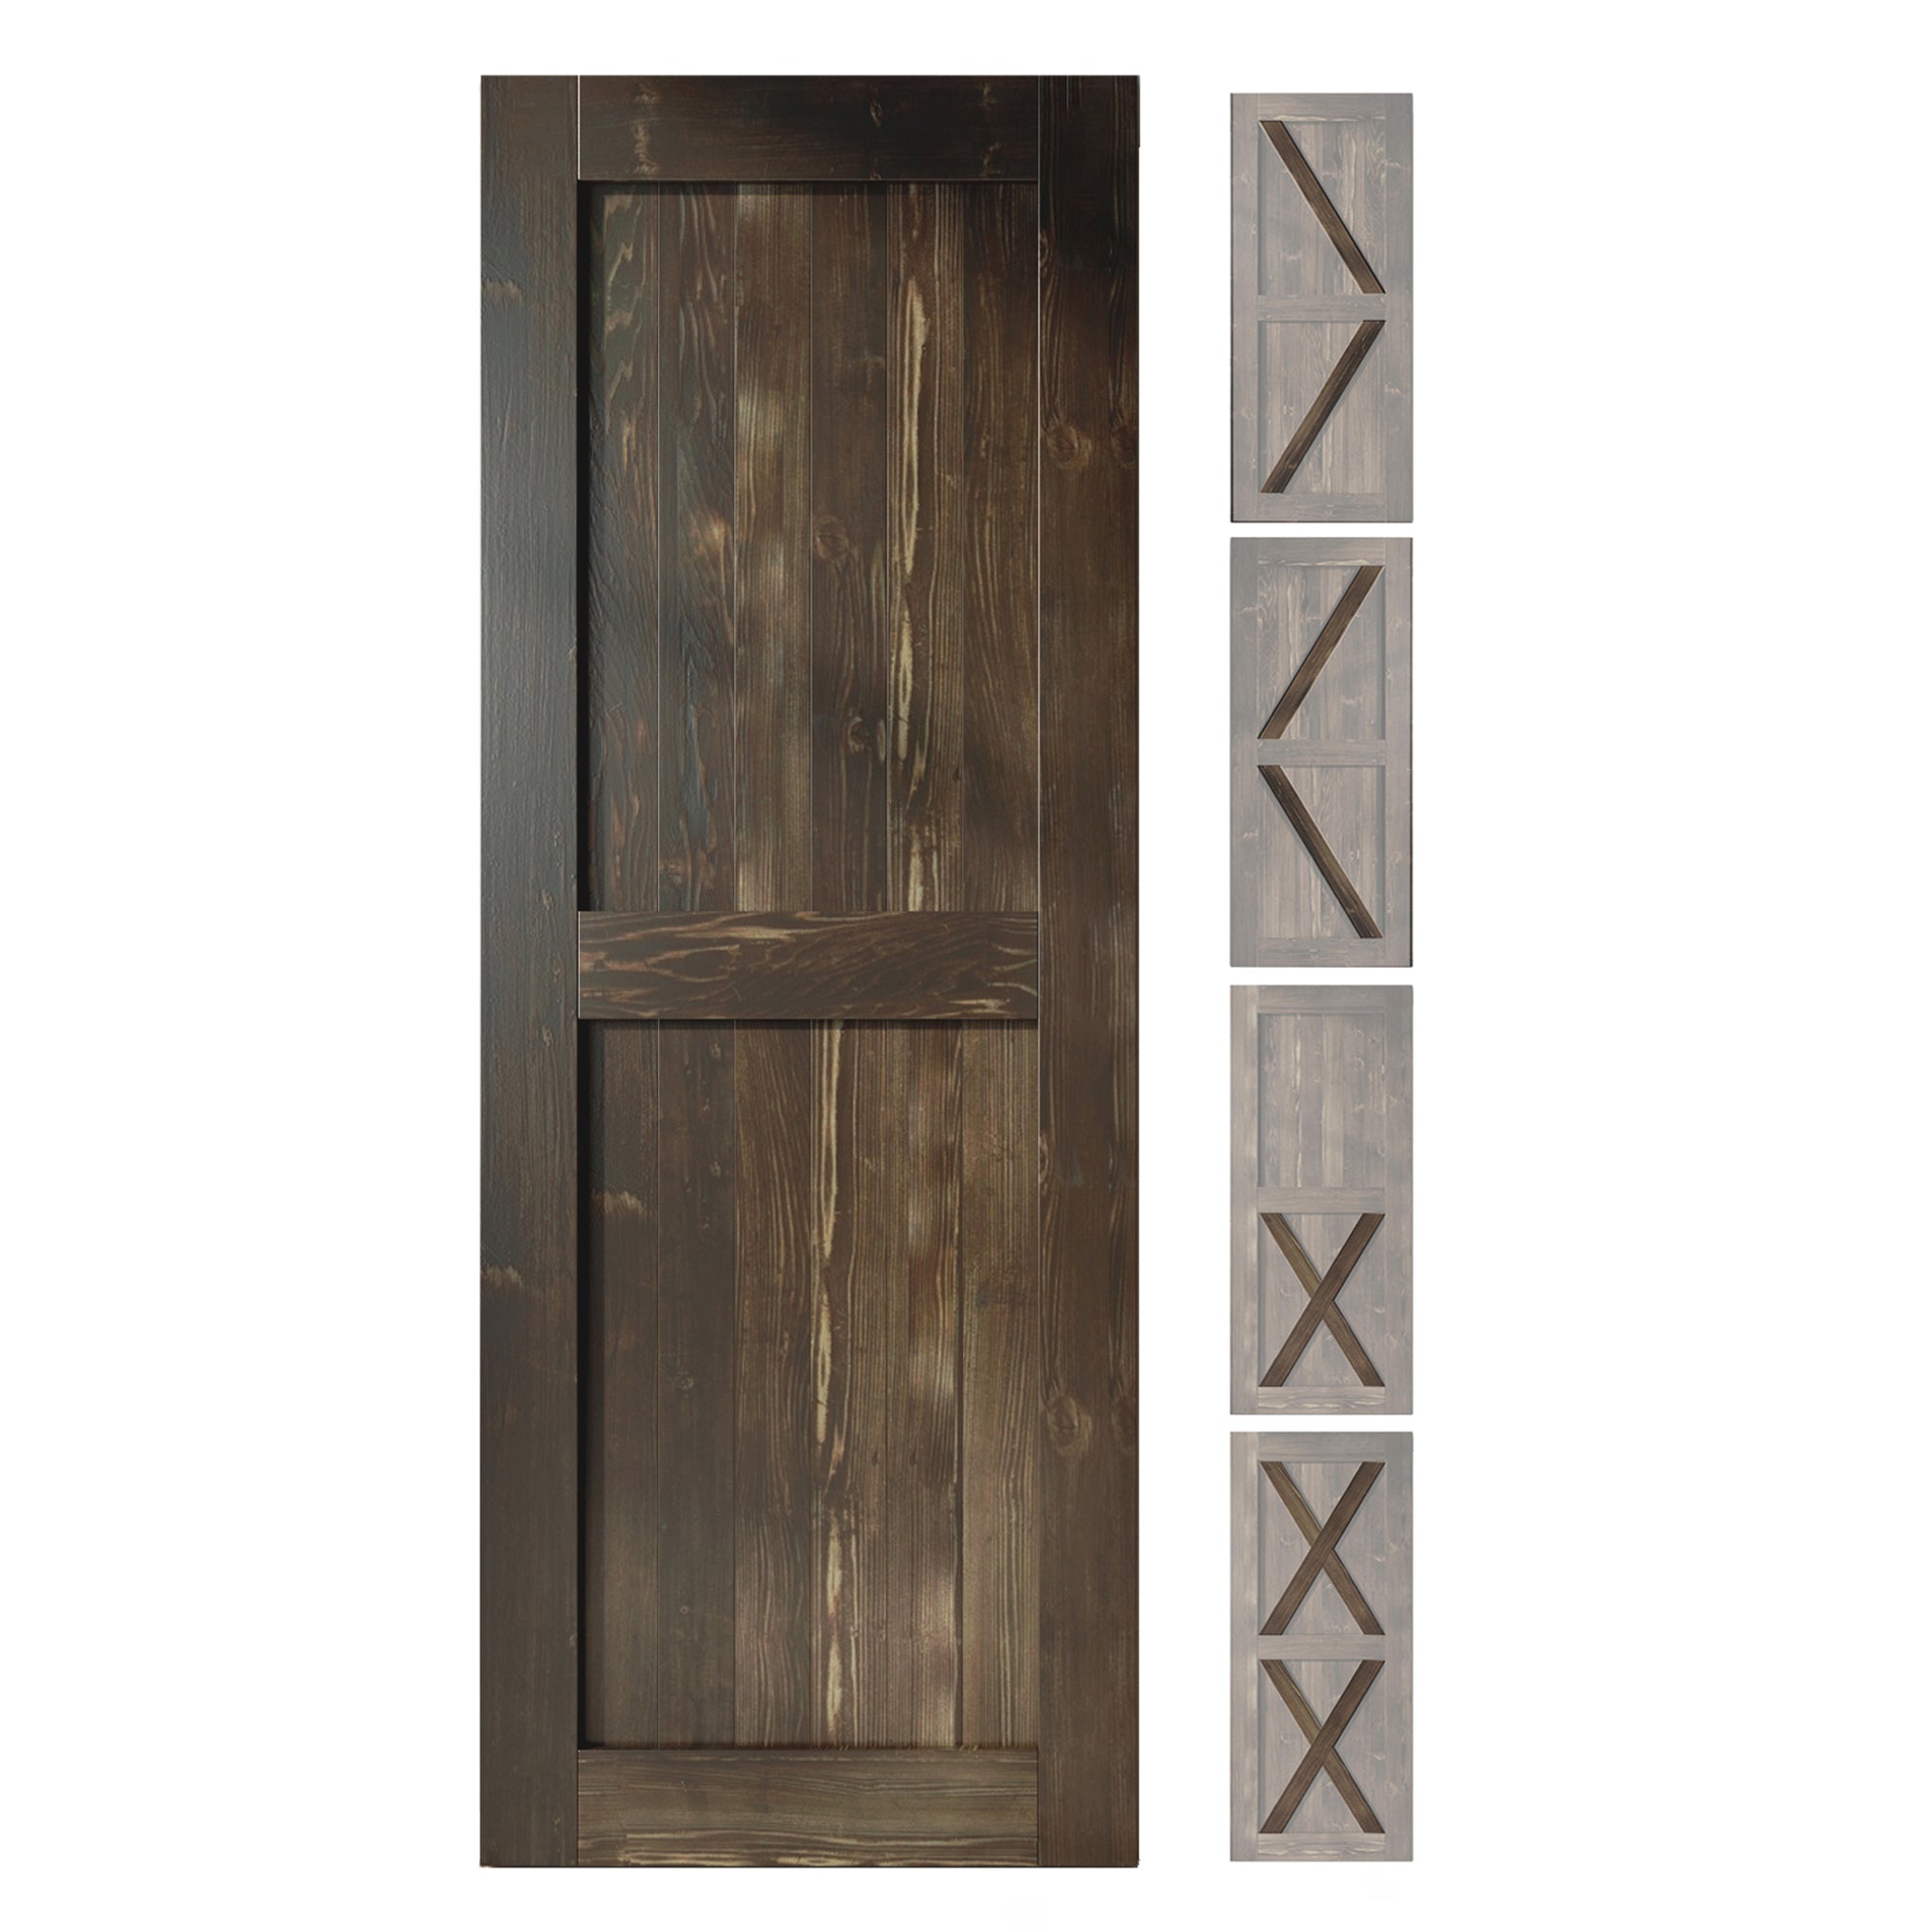 84" Height Finished & Unassembled 5-in-1 Design Wood Barn Door